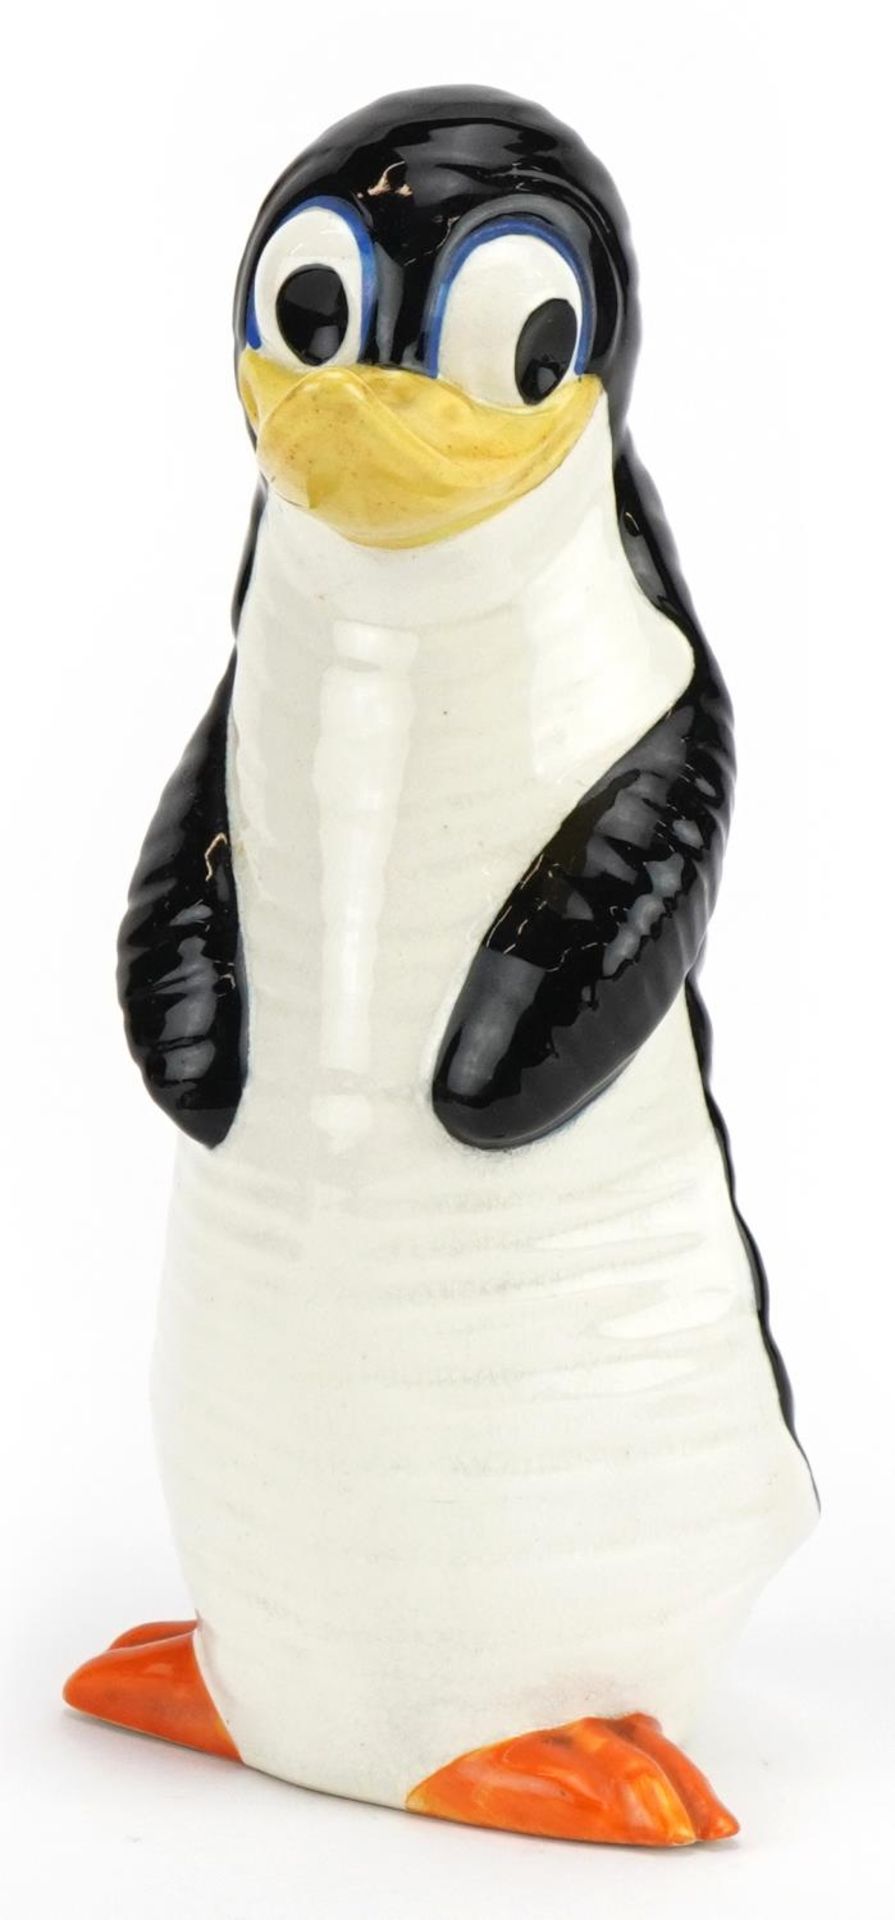 Carlton Ware pottery penguin, 20cm high : For further information on this lot please visit www.